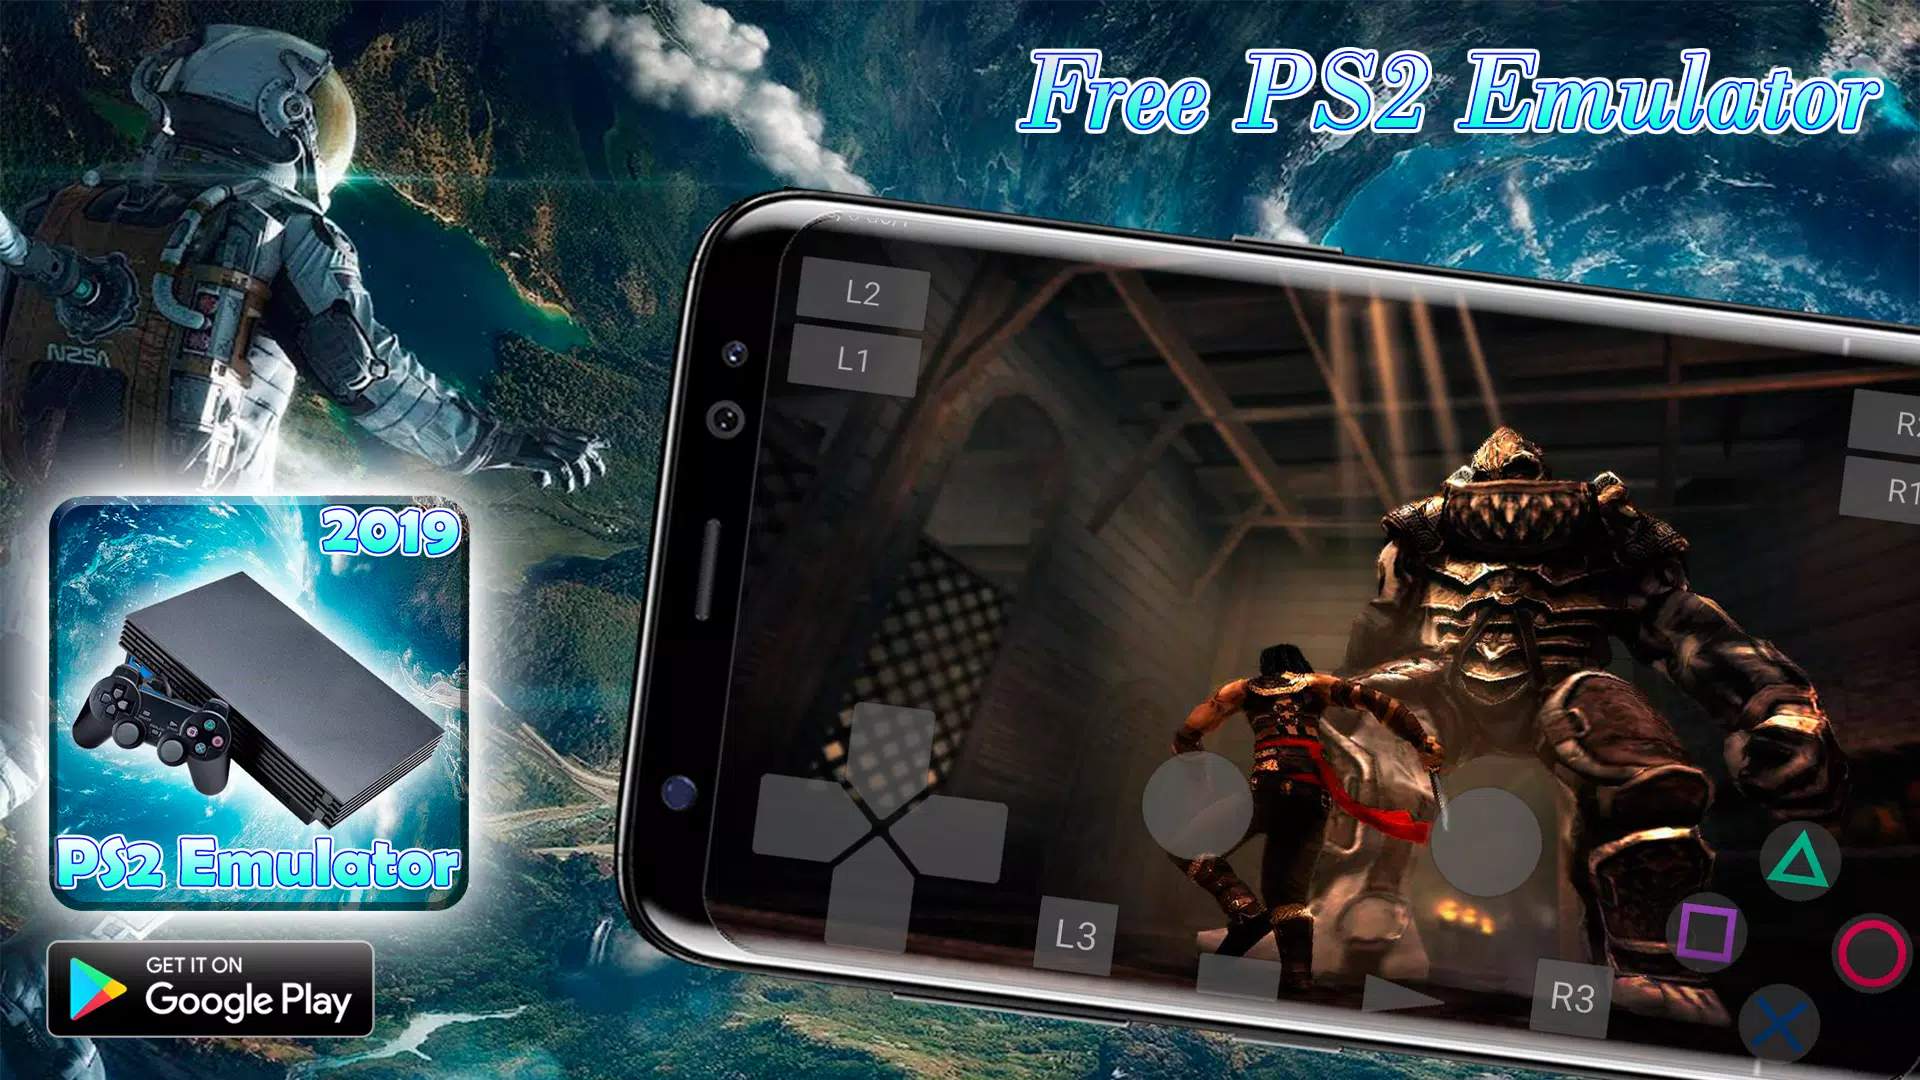 Video2me Pro 1.6.45 Full Apk android